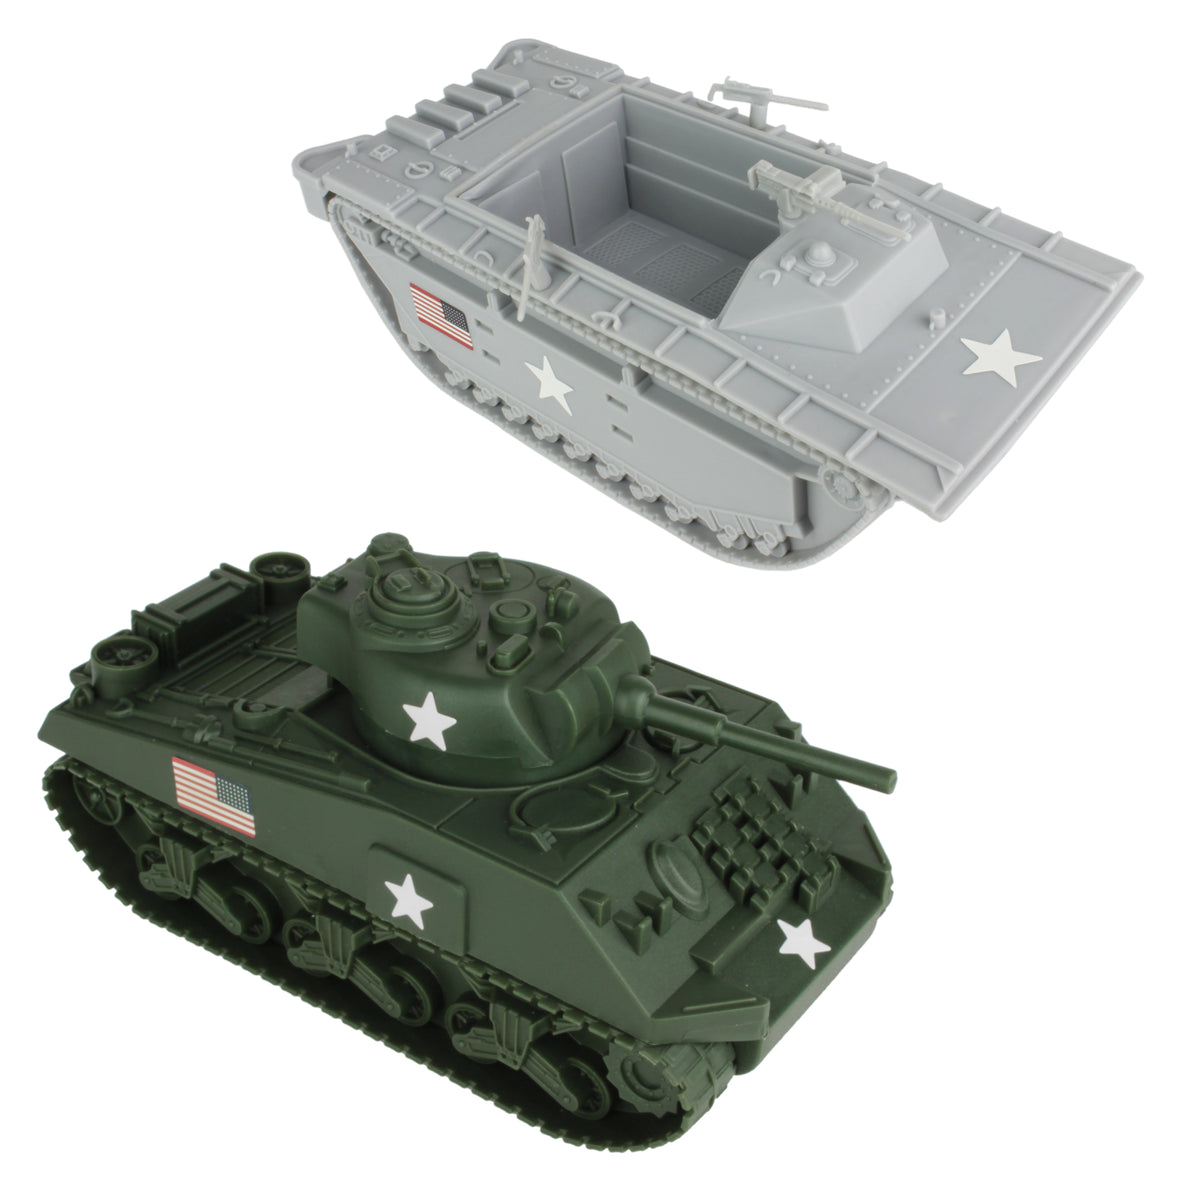 toy army tanks for sale